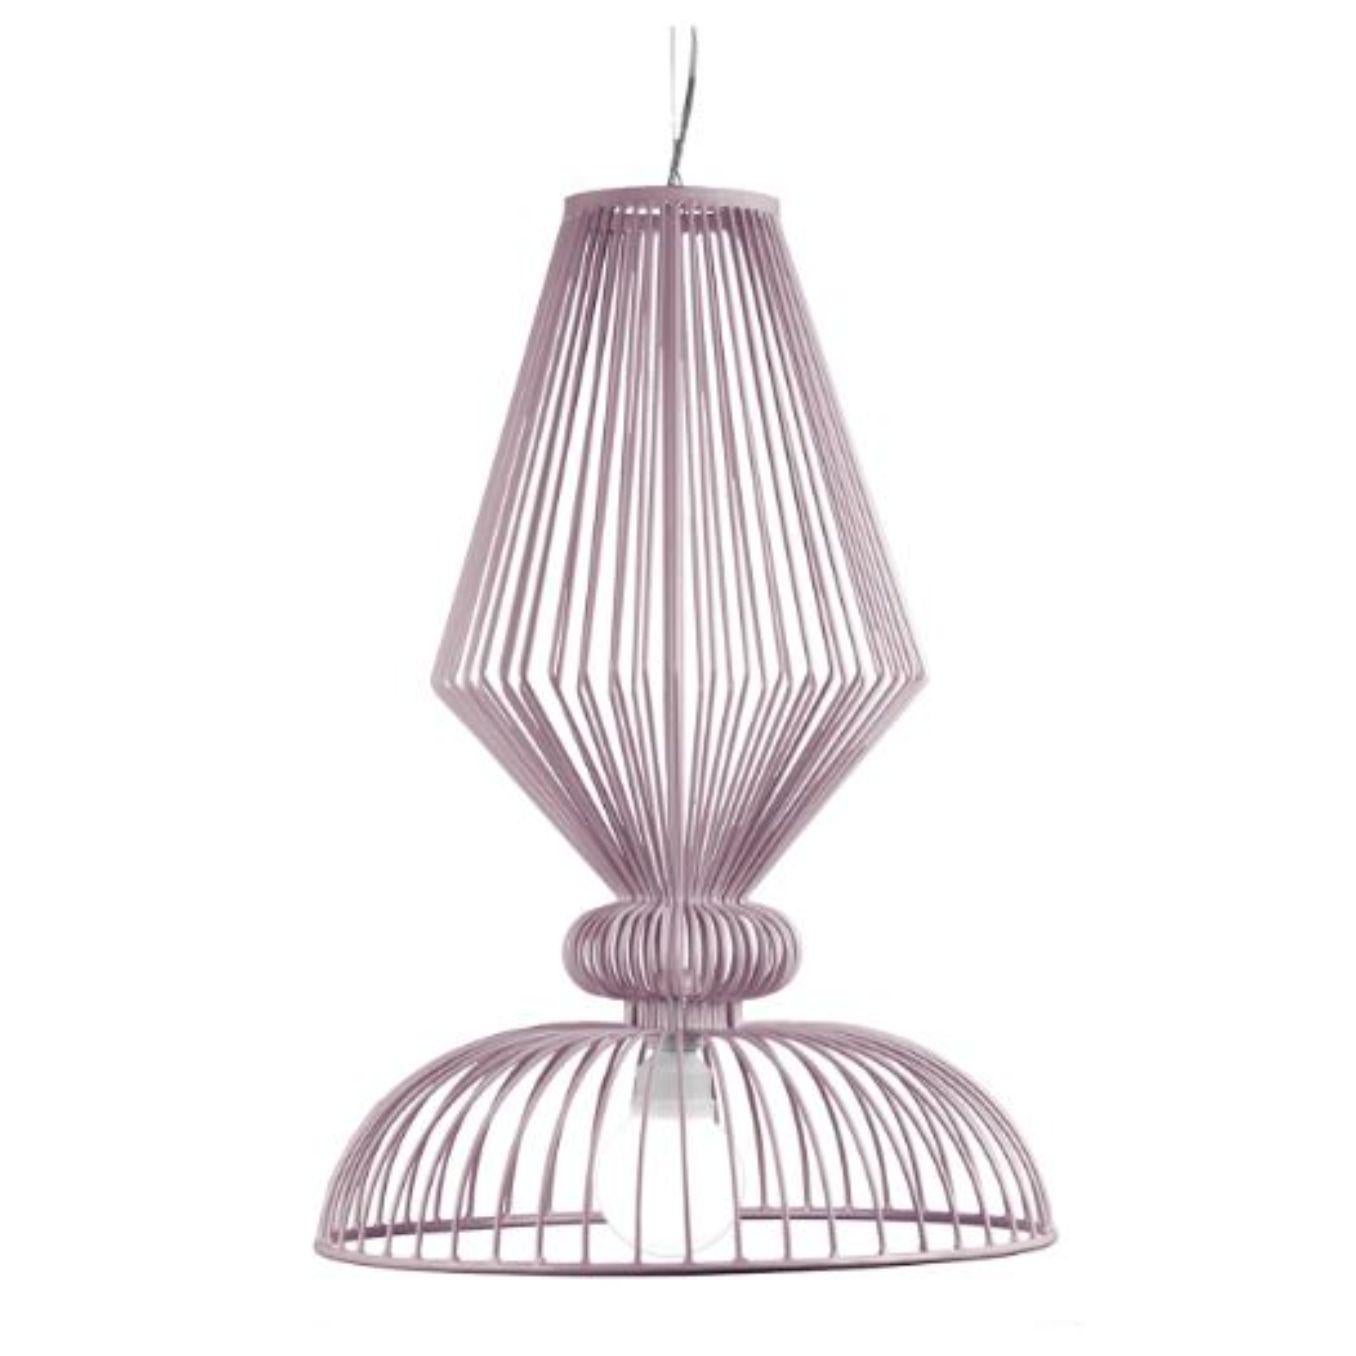 Lilac expand suspension lamp by Dooq.
Dimensions: W 50 x D 50 x H 70 cm.
Materials: lacquered metal, polished or brushed metal
Also available in different colors and materials.

Information:
230V/50Hz
E27/1x20W LED
120V/60Hz
E26/1x15W LED
bulb not